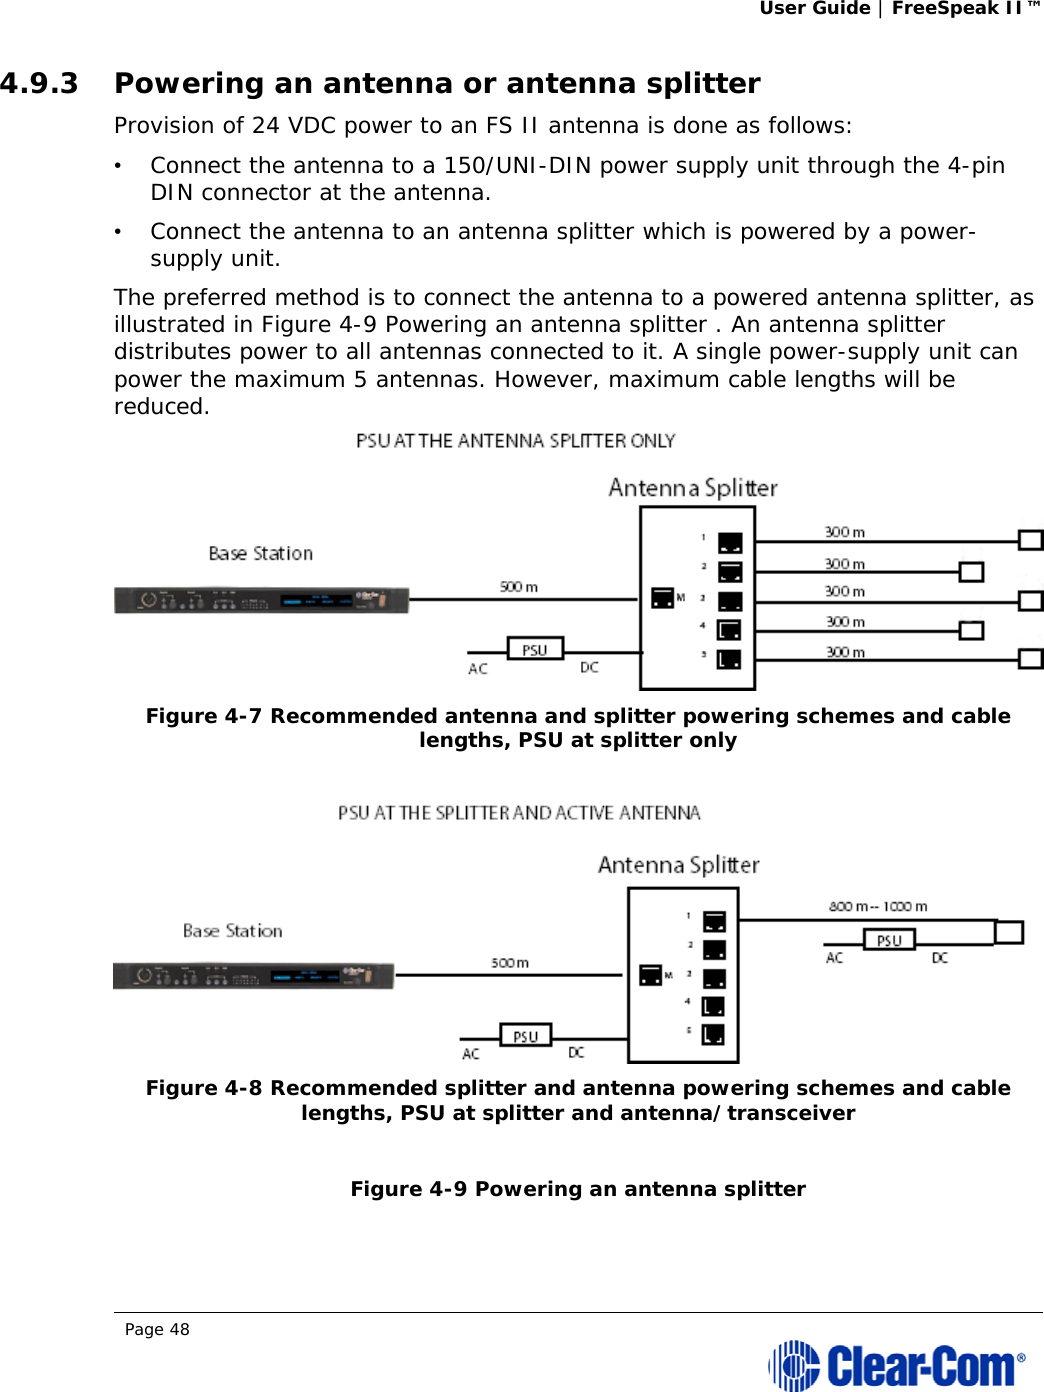 User Guide | FreeSpeak II™  Page 48  4.9.3 Powering an antenna or antenna splitter Provision of 24 VDC power to an FS II antenna is done as follows:  •   Connect the antenna to a 150/UNI-DIN power supply unit through the 4-pin DIN connector at the antenna.  •   Connect the antenna to an antenna splitter which is powered by a power-supply unit.  The preferred method is to connect the antenna to a powered antenna splitter, as illustrated in Figure 4-9 Powering an antenna splitter . An antenna splitter distributes power to all antennas connected to it. A single power-supply unit can power the maximum 5 antennas. However, maximum cable lengths will be reduced.  Figure 4-7 Recommended antenna and splitter powering schemes and cable lengths, PSU at splitter only    Figure 4-8 Recommended splitter and antenna powering schemes and cable lengths, PSU at splitter and antenna/transceiver  Figure 4-9 Powering an antenna splitter  